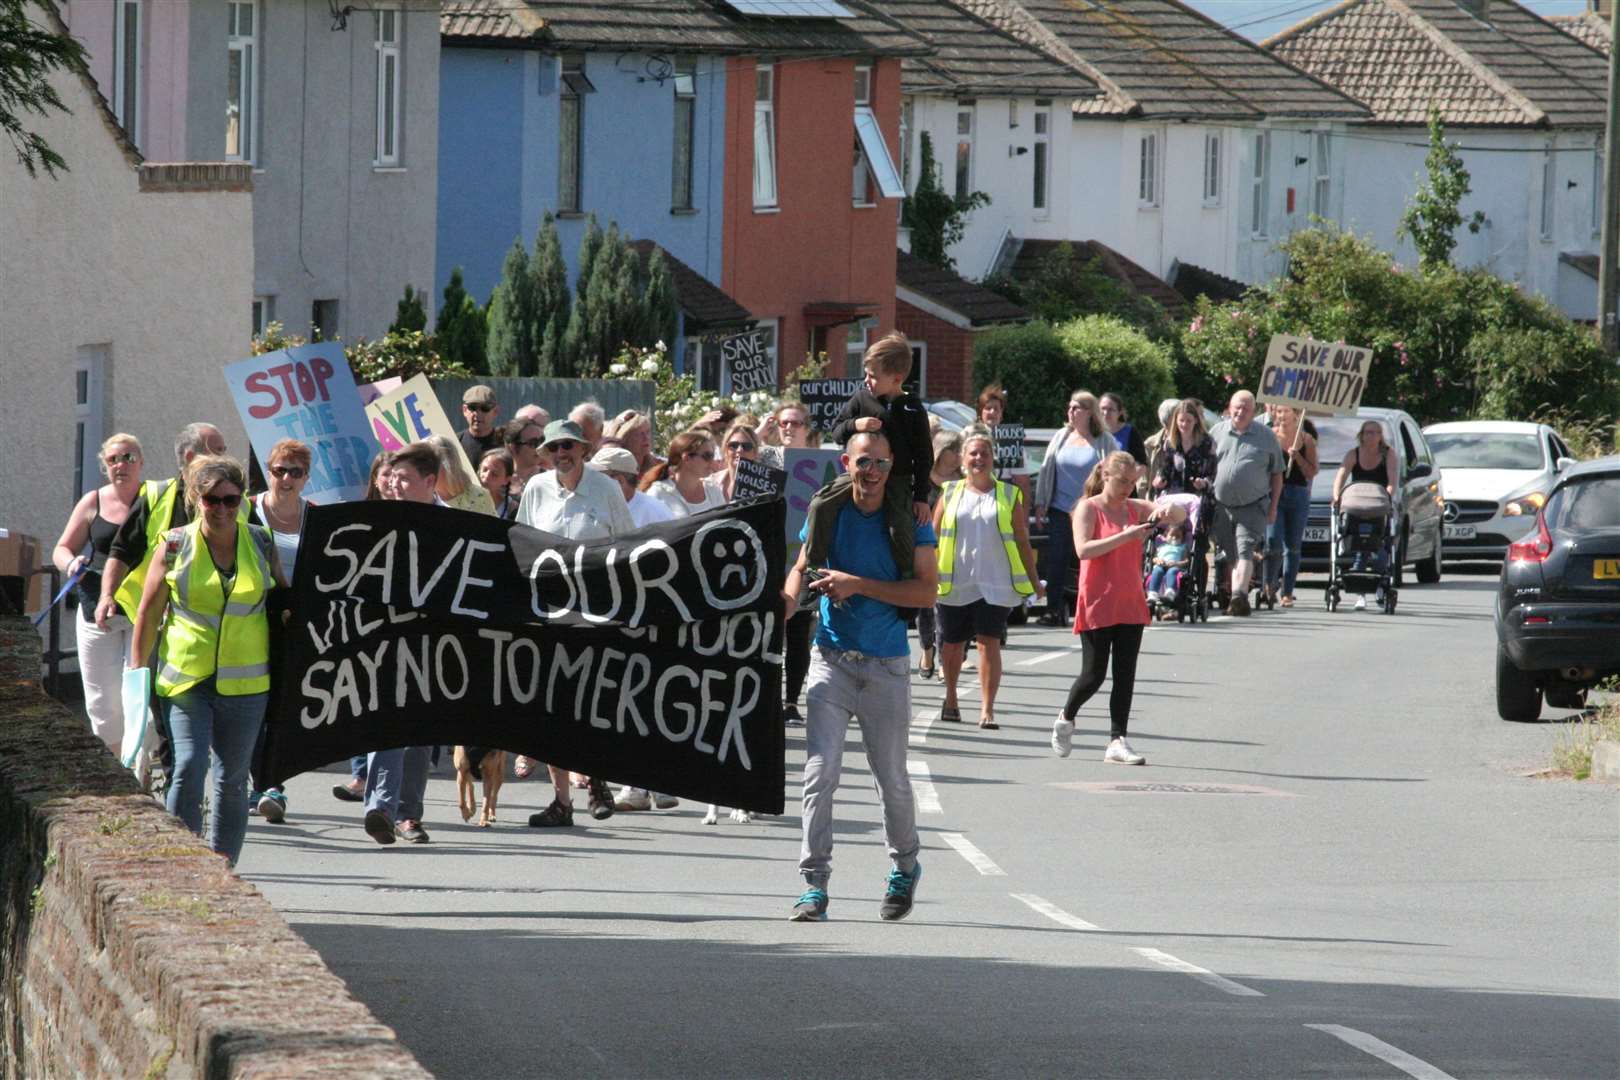 Protestors march from Stoke Primary Academy to Allhallows Primary Academy to rally against merger plans (13238501)